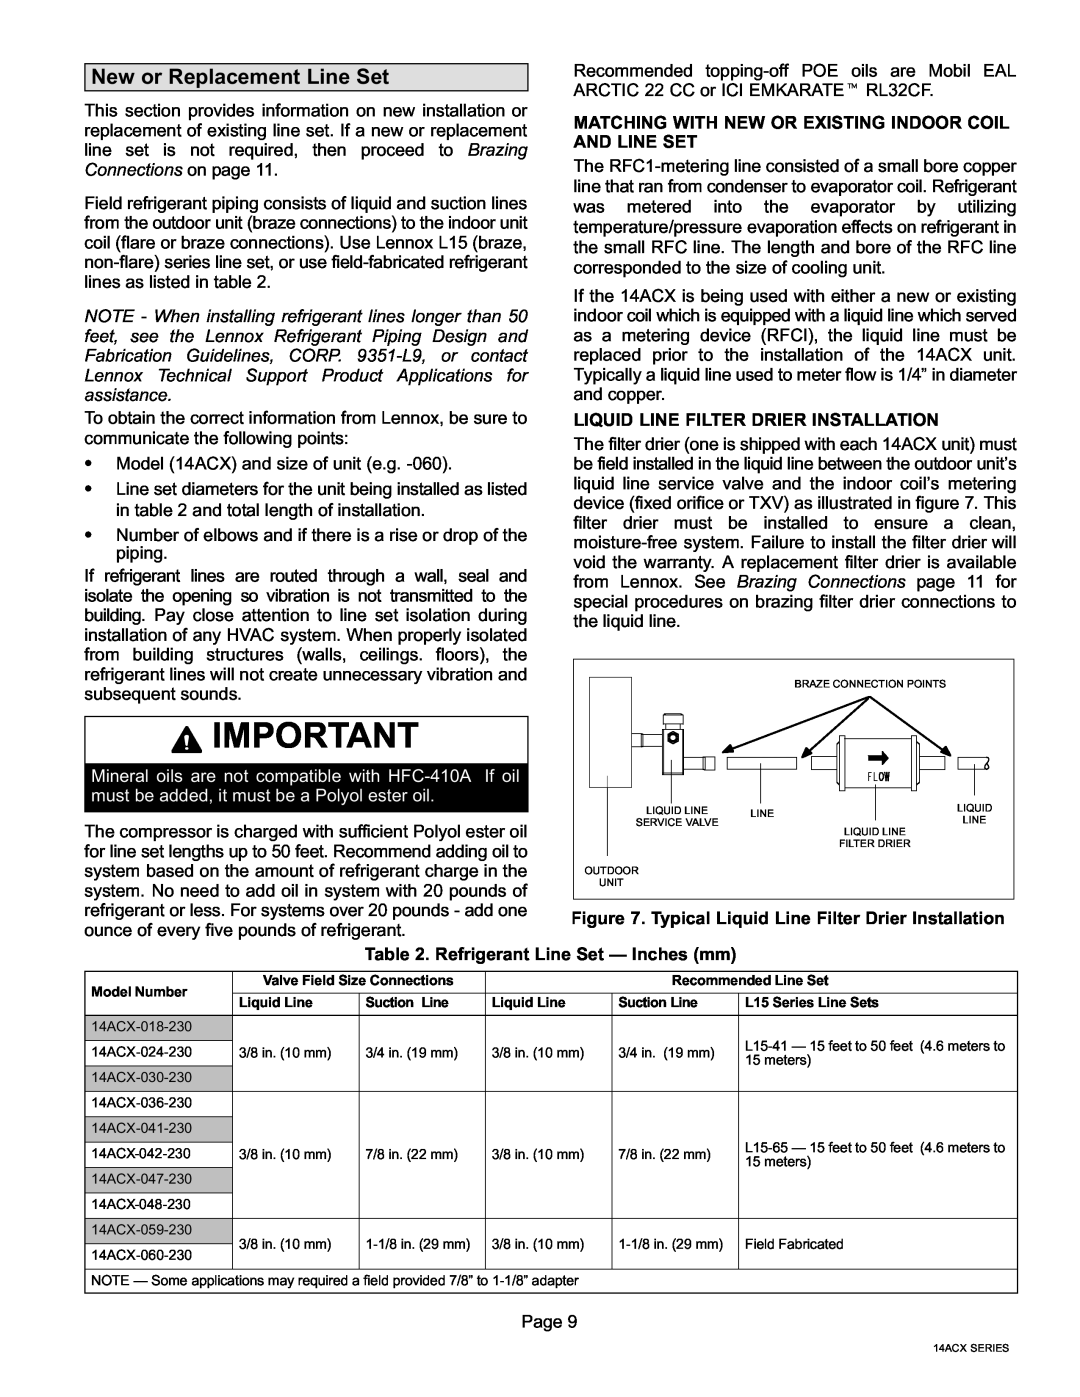 Lennox International Inc Merit Series 14ACX Units, CONDENSING UNITS installation instructions New or Replacement Line Set 